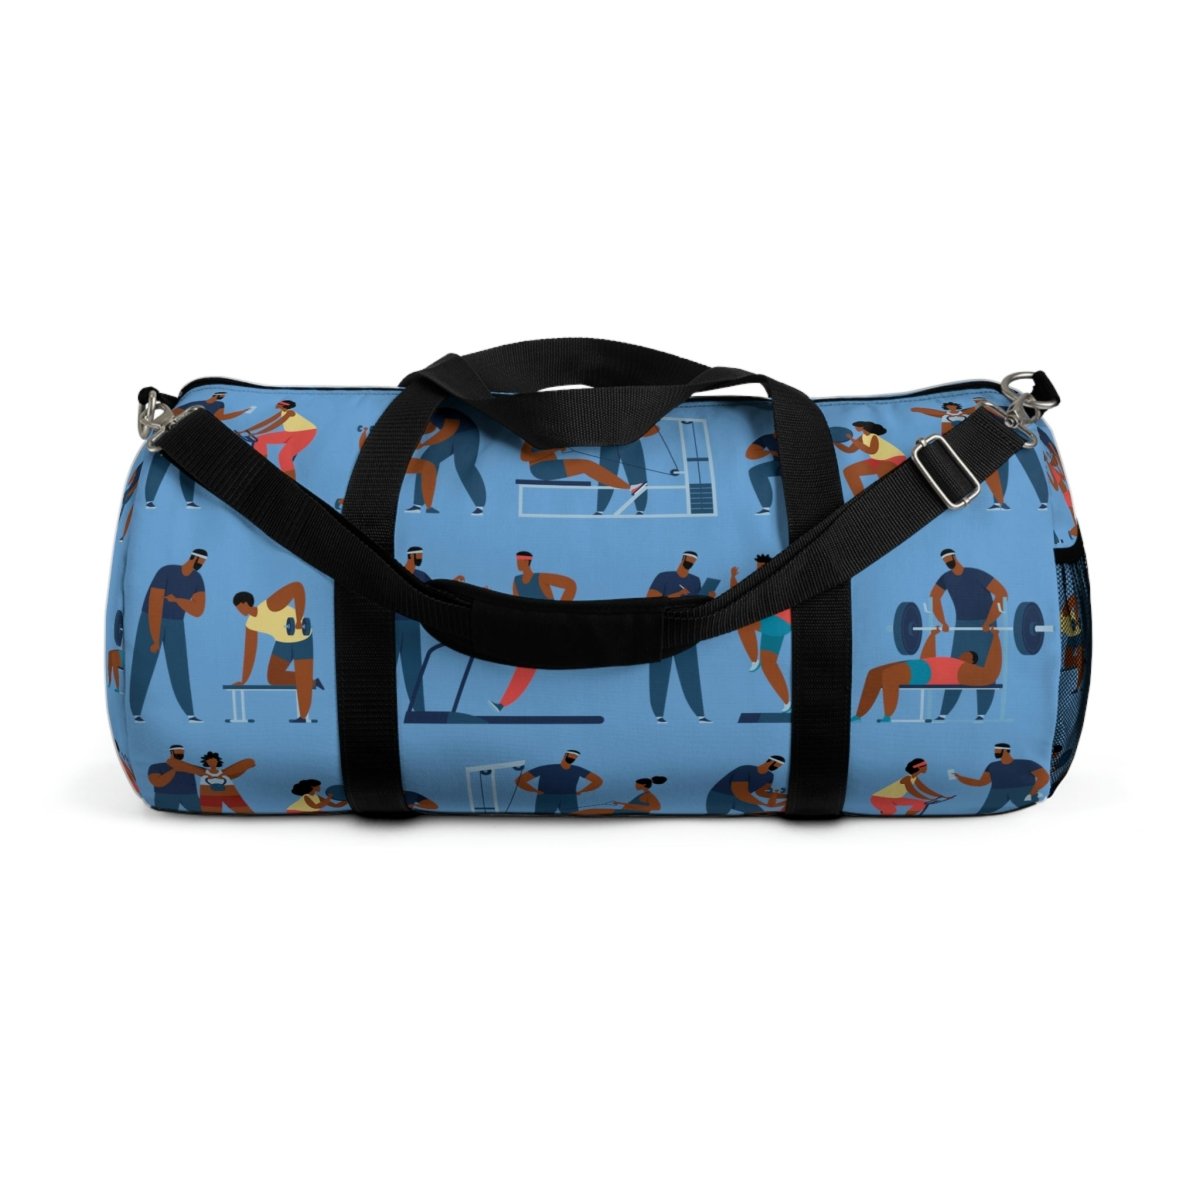 Personal Trainer Duffel Bag - The Trini Gee